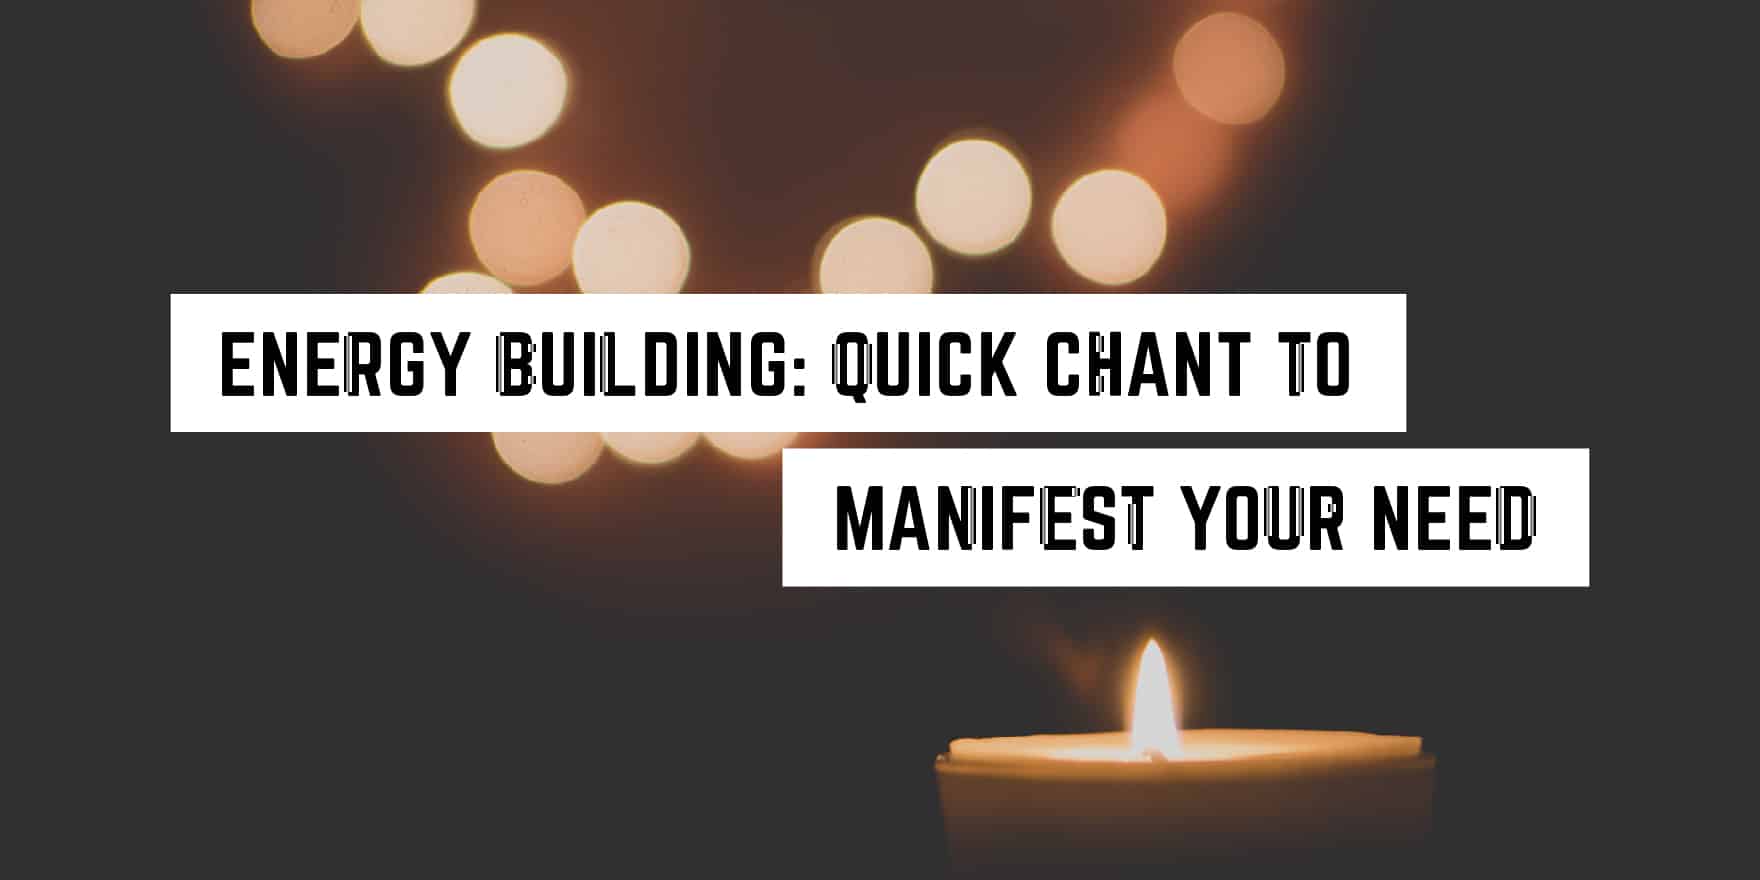 Energy Building: Quick Chant to Manifest your Need